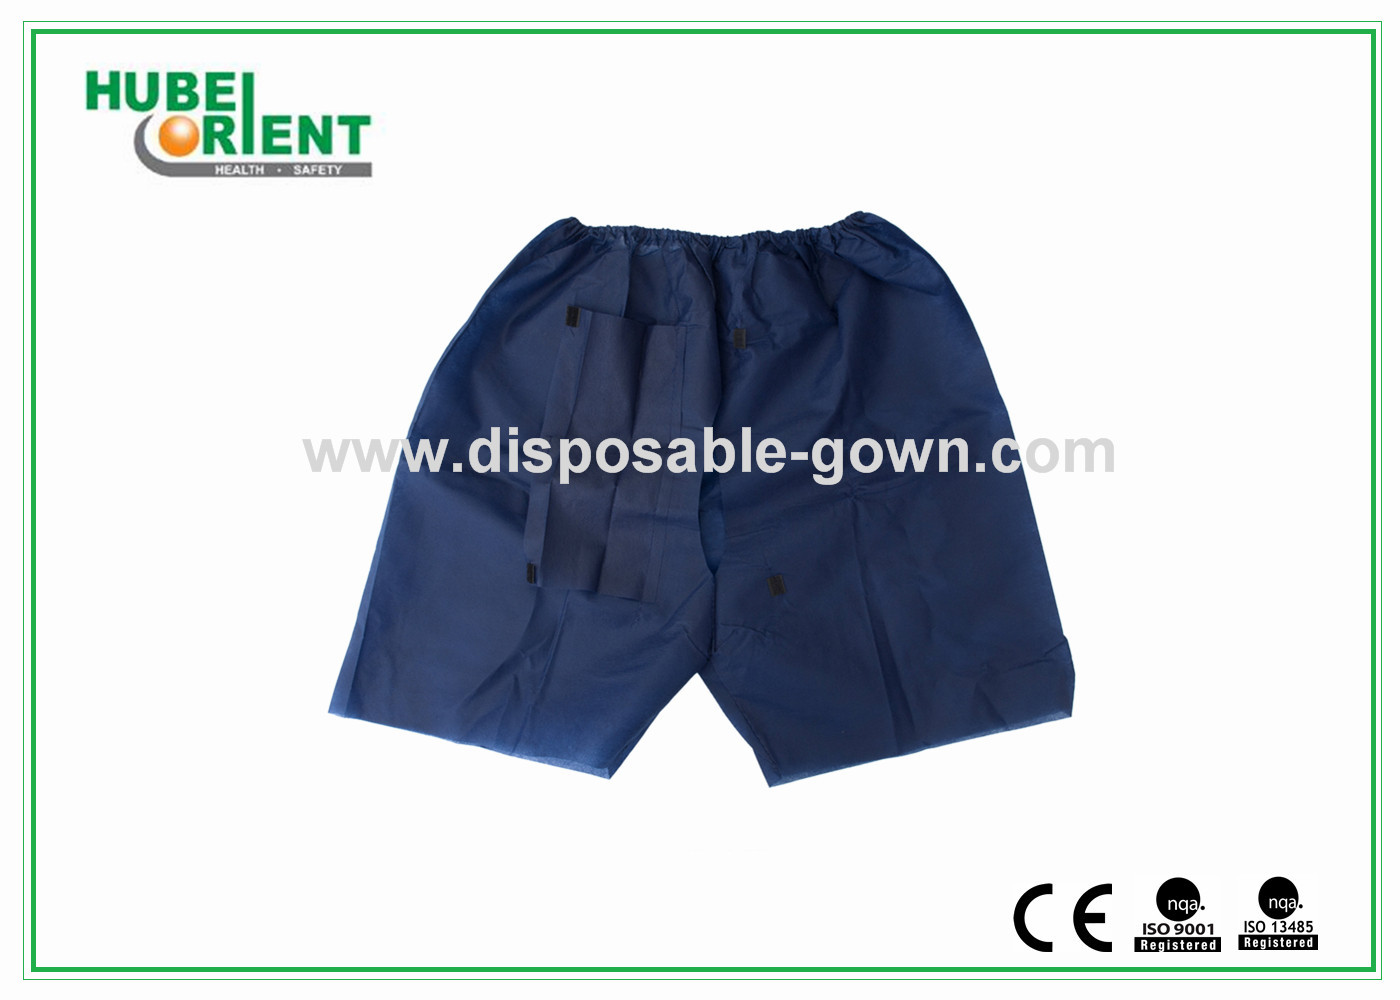 Buy Professional Light-weight Disposable Scrub Pants  With CE/ISO certificated at wholesale prices